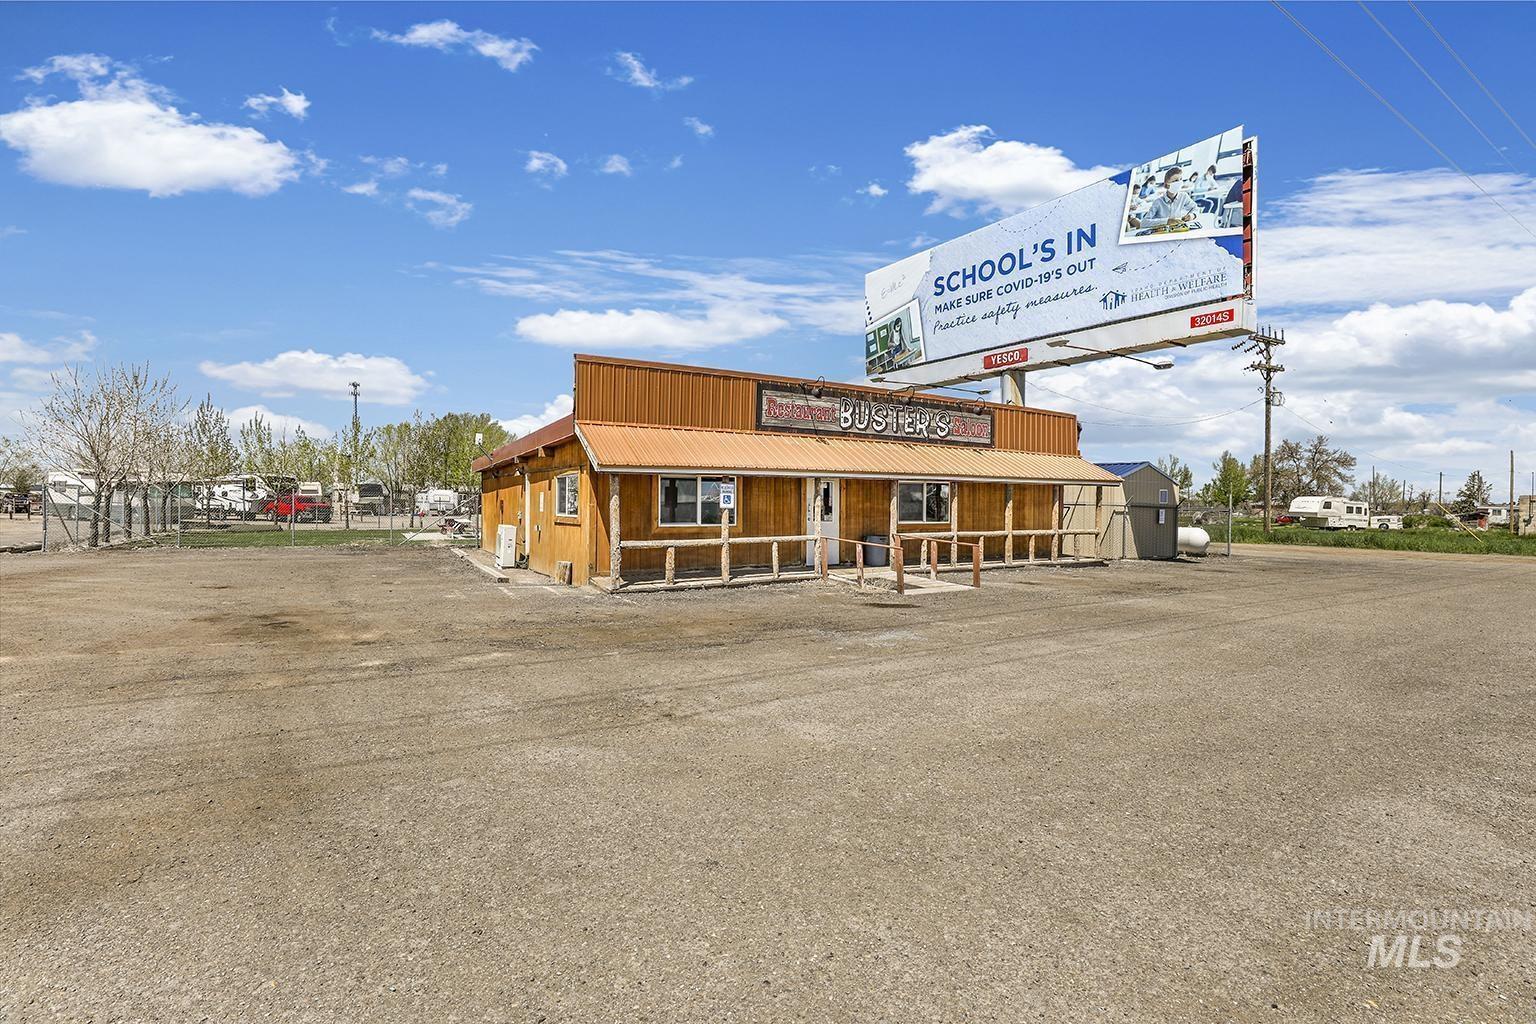 2695 US Hwy 93, Twin Falls, Idaho 83301, Business/Commercial For Sale, Price $950,000,MLS 98906640